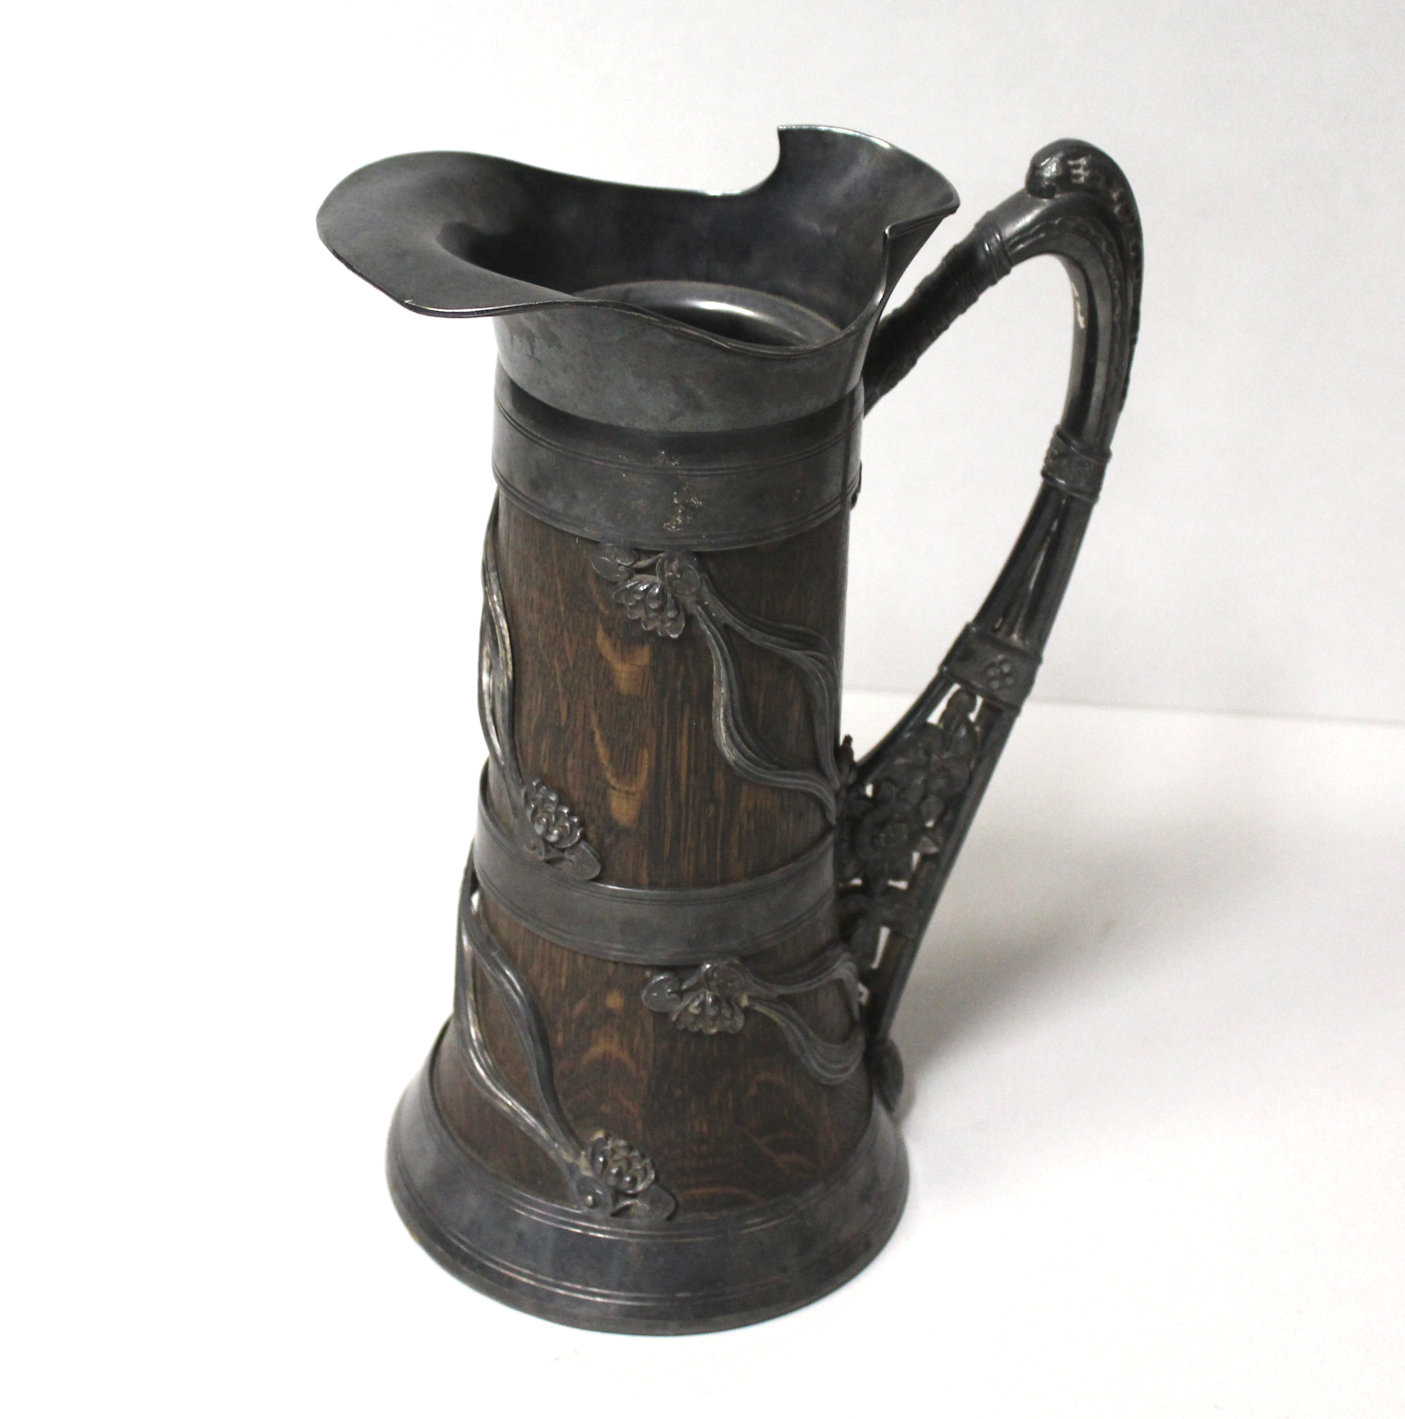 Bargain John's Antiques  Antique Treenware Pitcher - Quarter Sawn Oak  Pitcher with Silver Overlay - St Louis Silver - Bargain John's Antiques